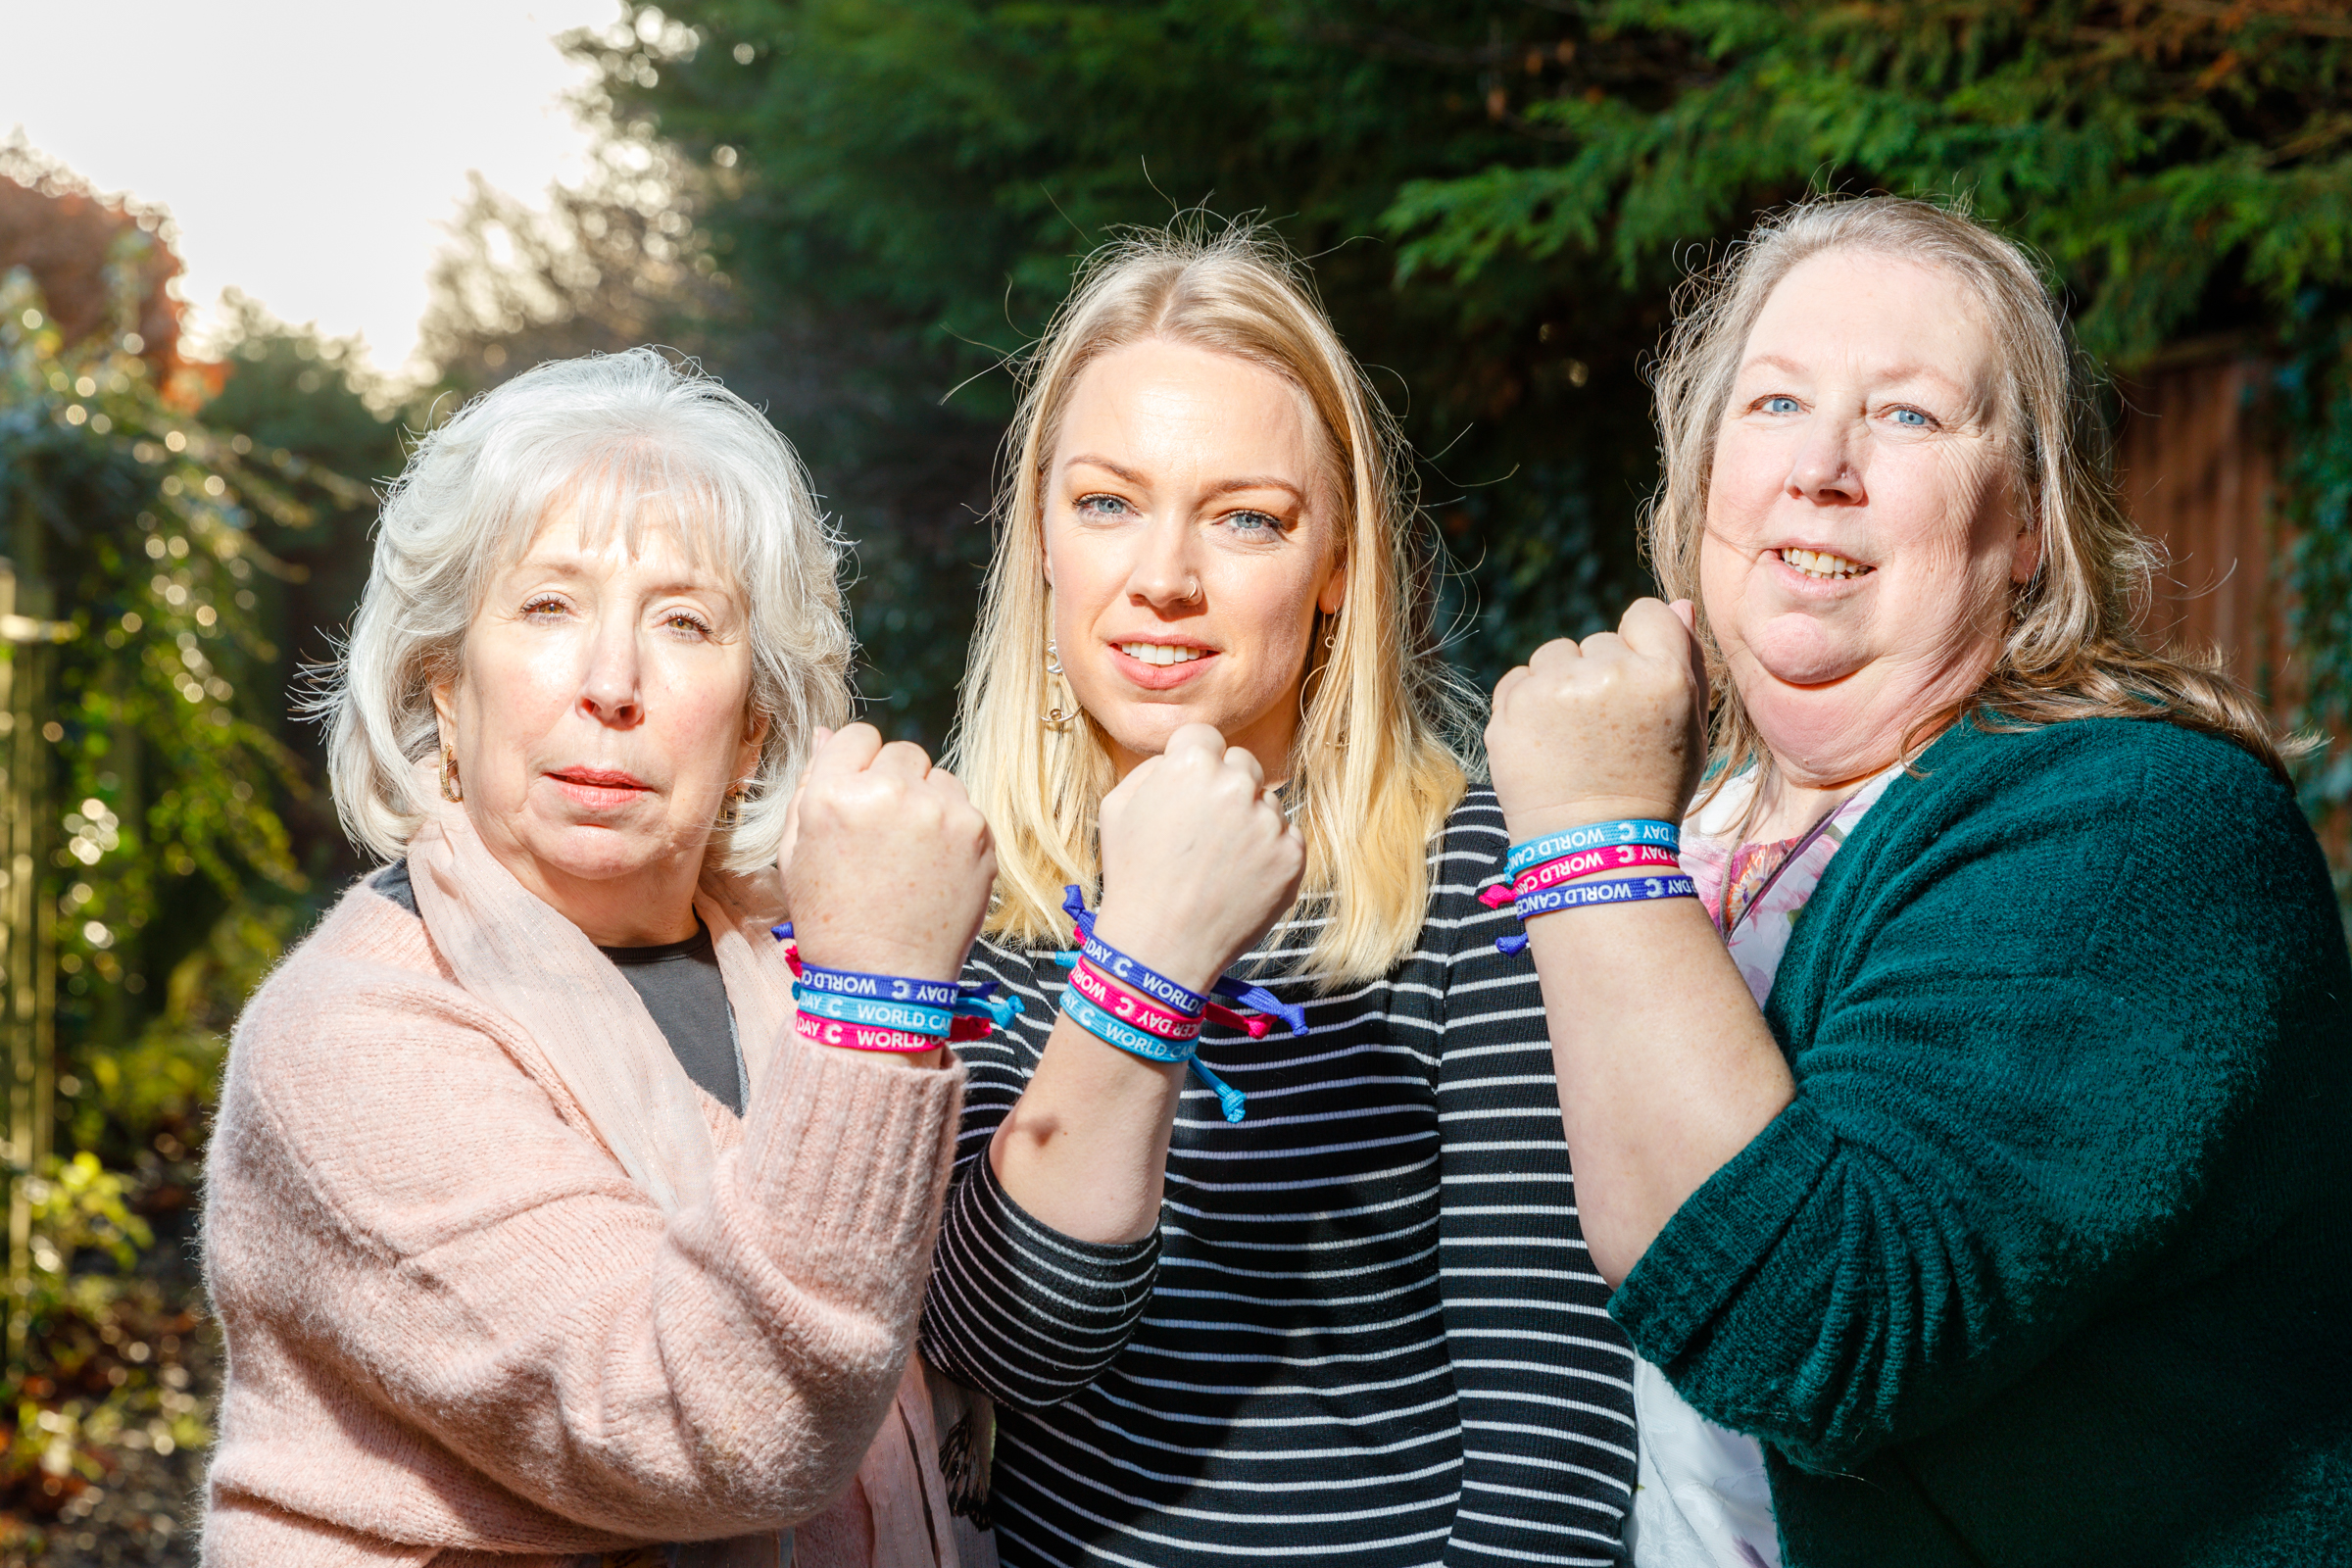 L-R Gail, Becky and Debbie are wearing Unity Bands in support of World Cancer Day